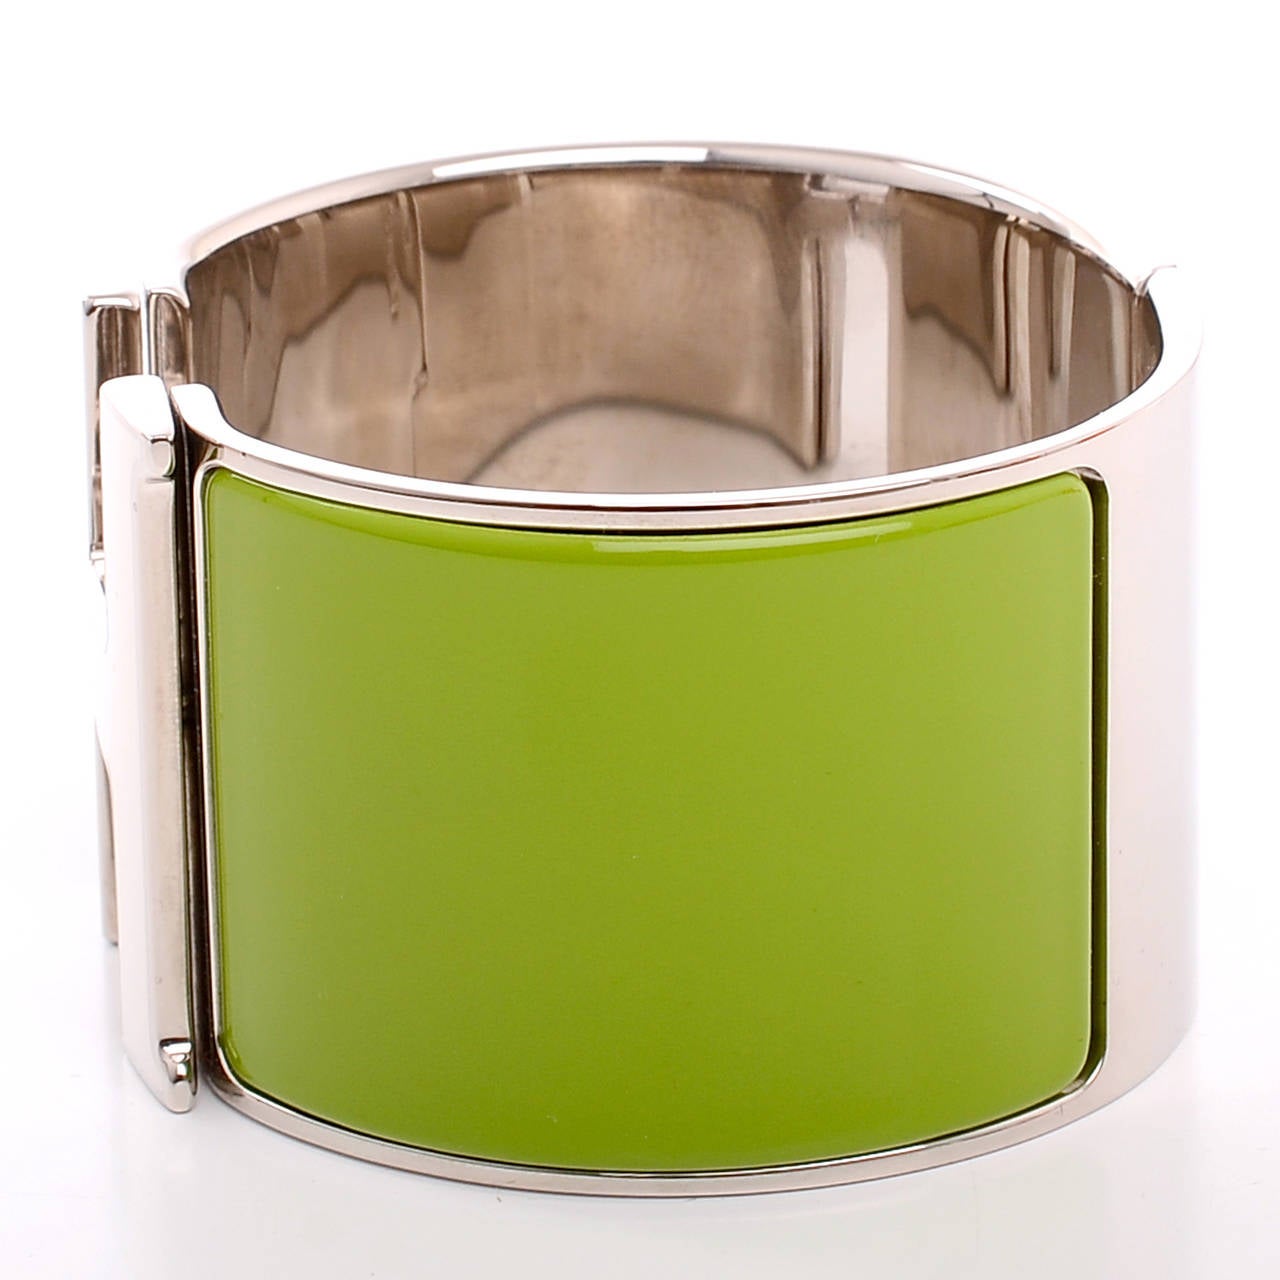 Hermes extra wide Clic Clac H bracelet in Vert Prairie enamel with White enamel H closure and silver and palladium plated hardware in size PM.

Origin: France

Condition: Pristine, store fresh condition

Accompanied by: Hermes box and dustbag,